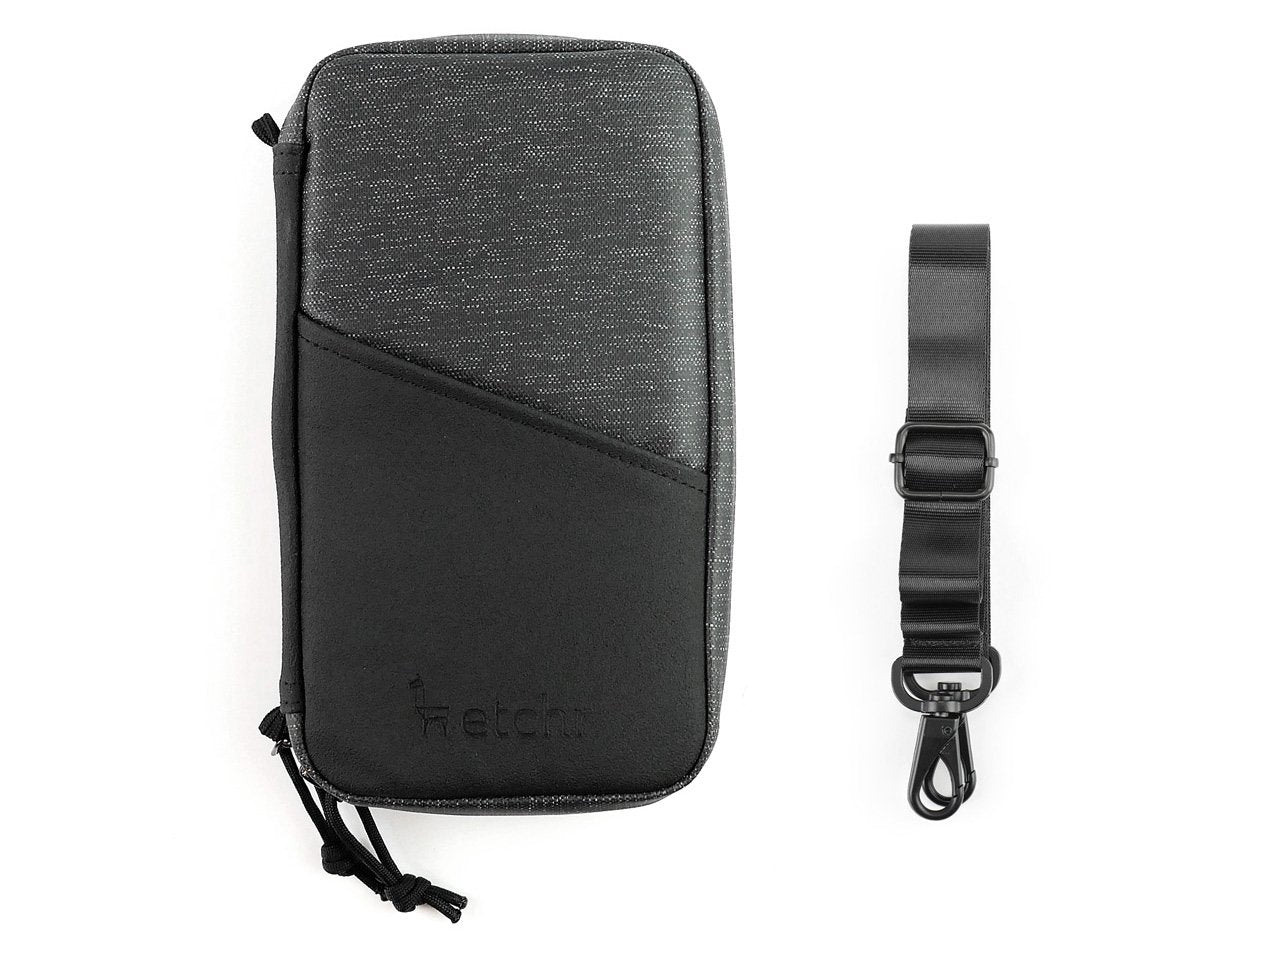 Etchr Field Case | Compact, high quality art carry case